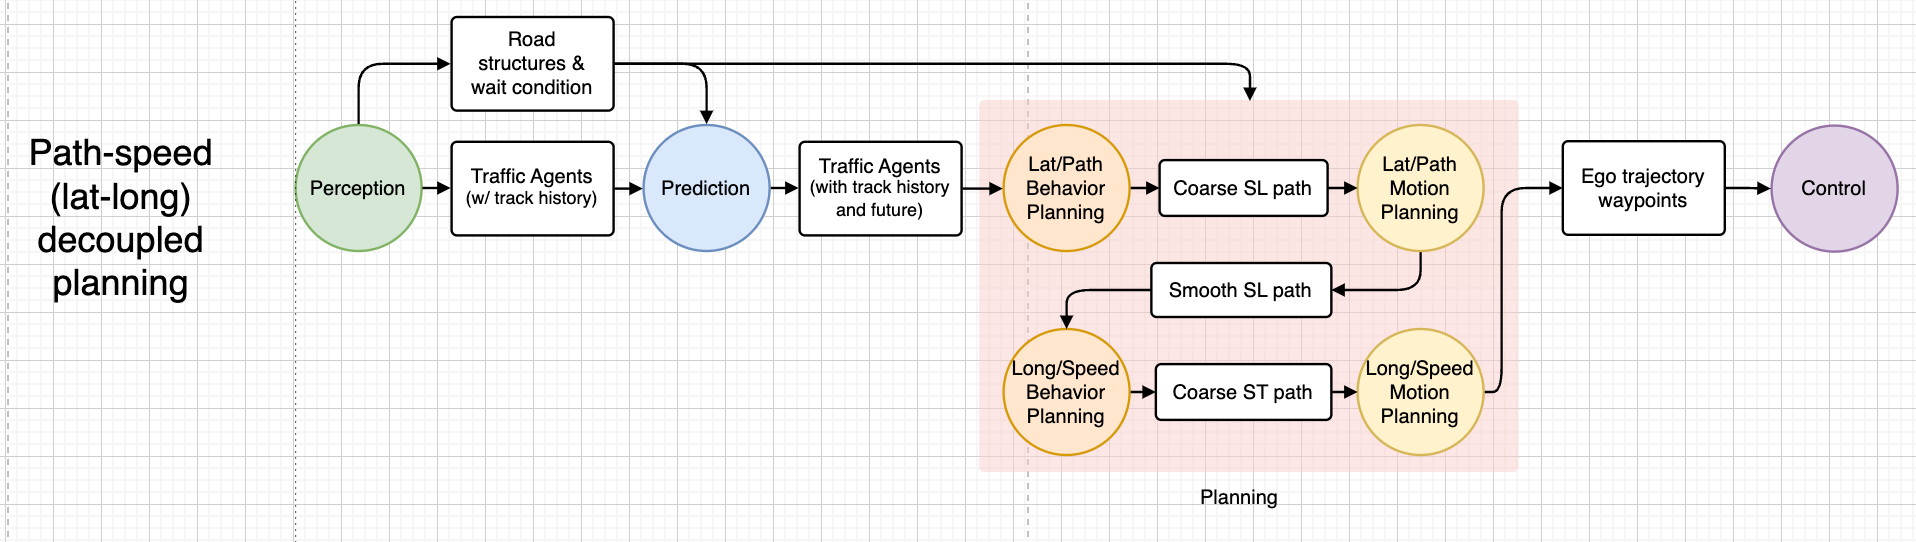 A full autonomous driving stack with path-speed decoupled planning (chart made by author)